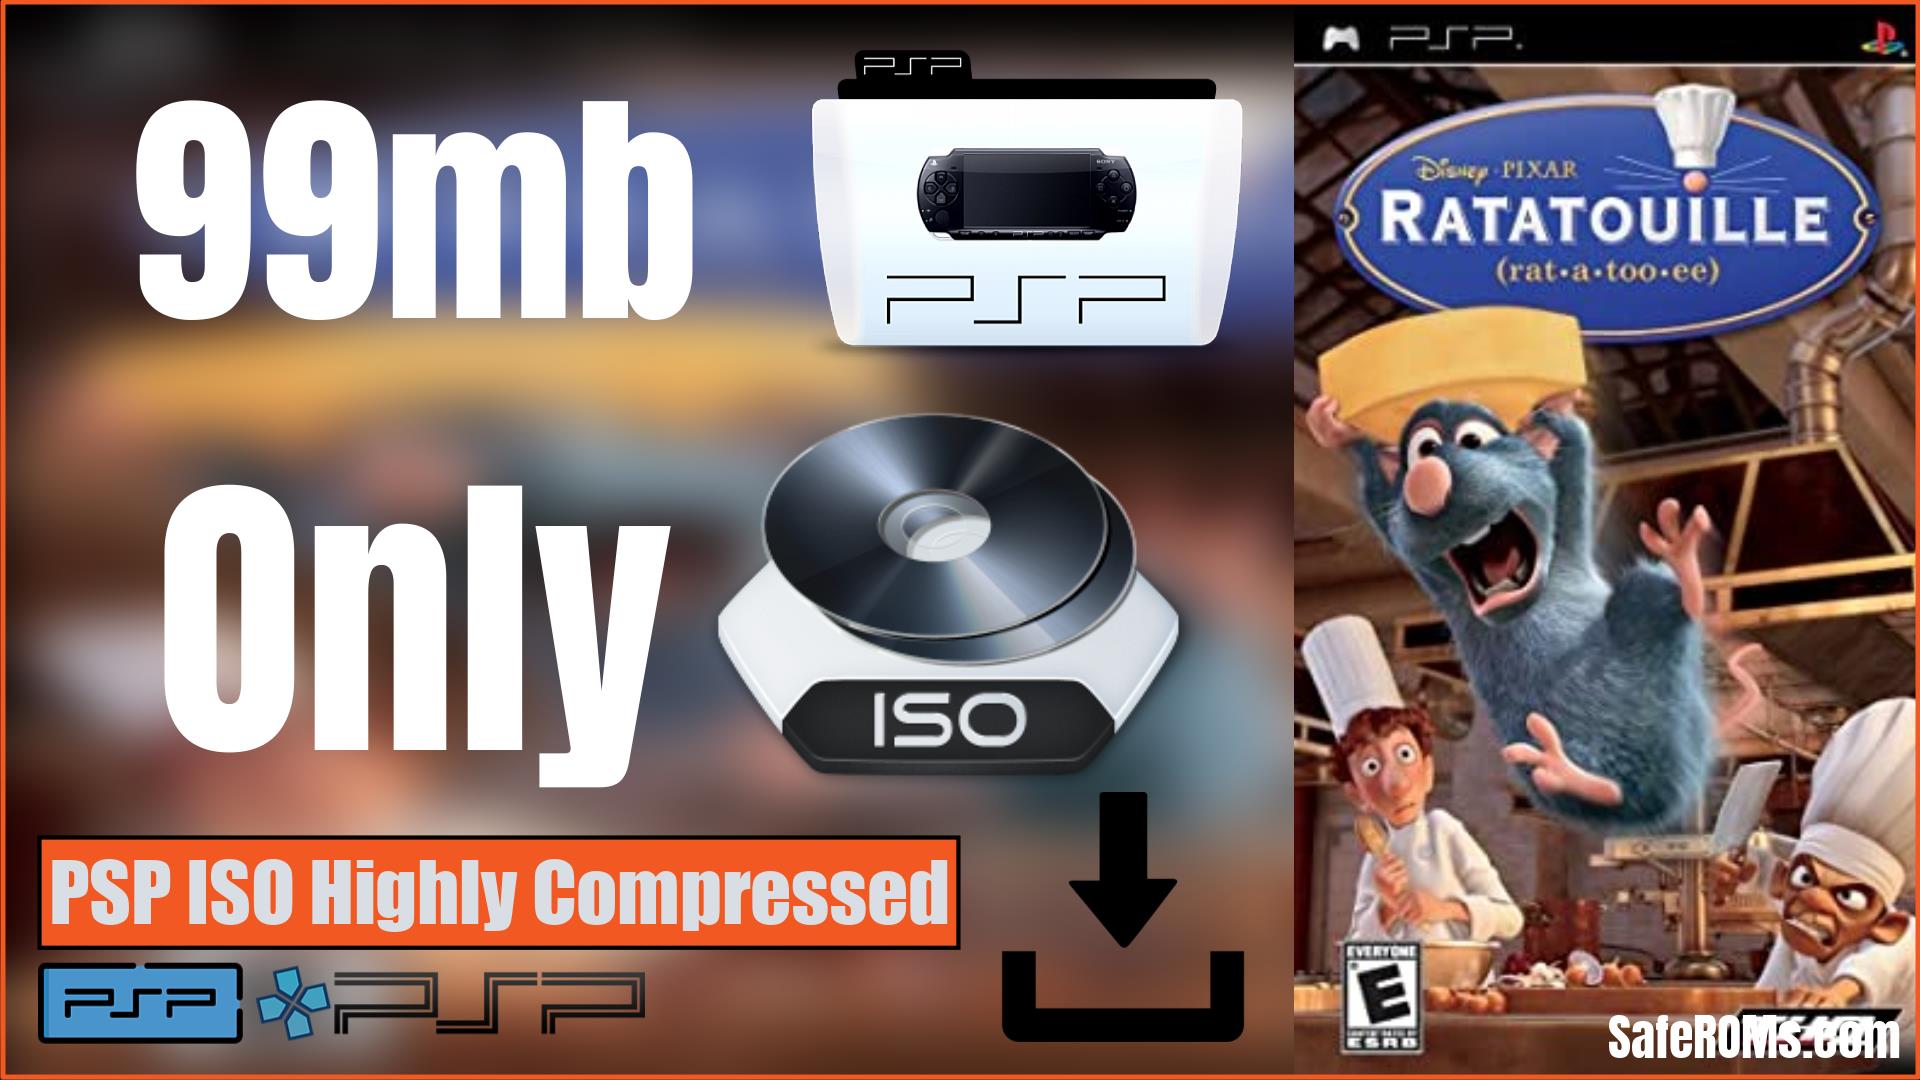 Ratatouille PSP ISO Highly Compressed Download